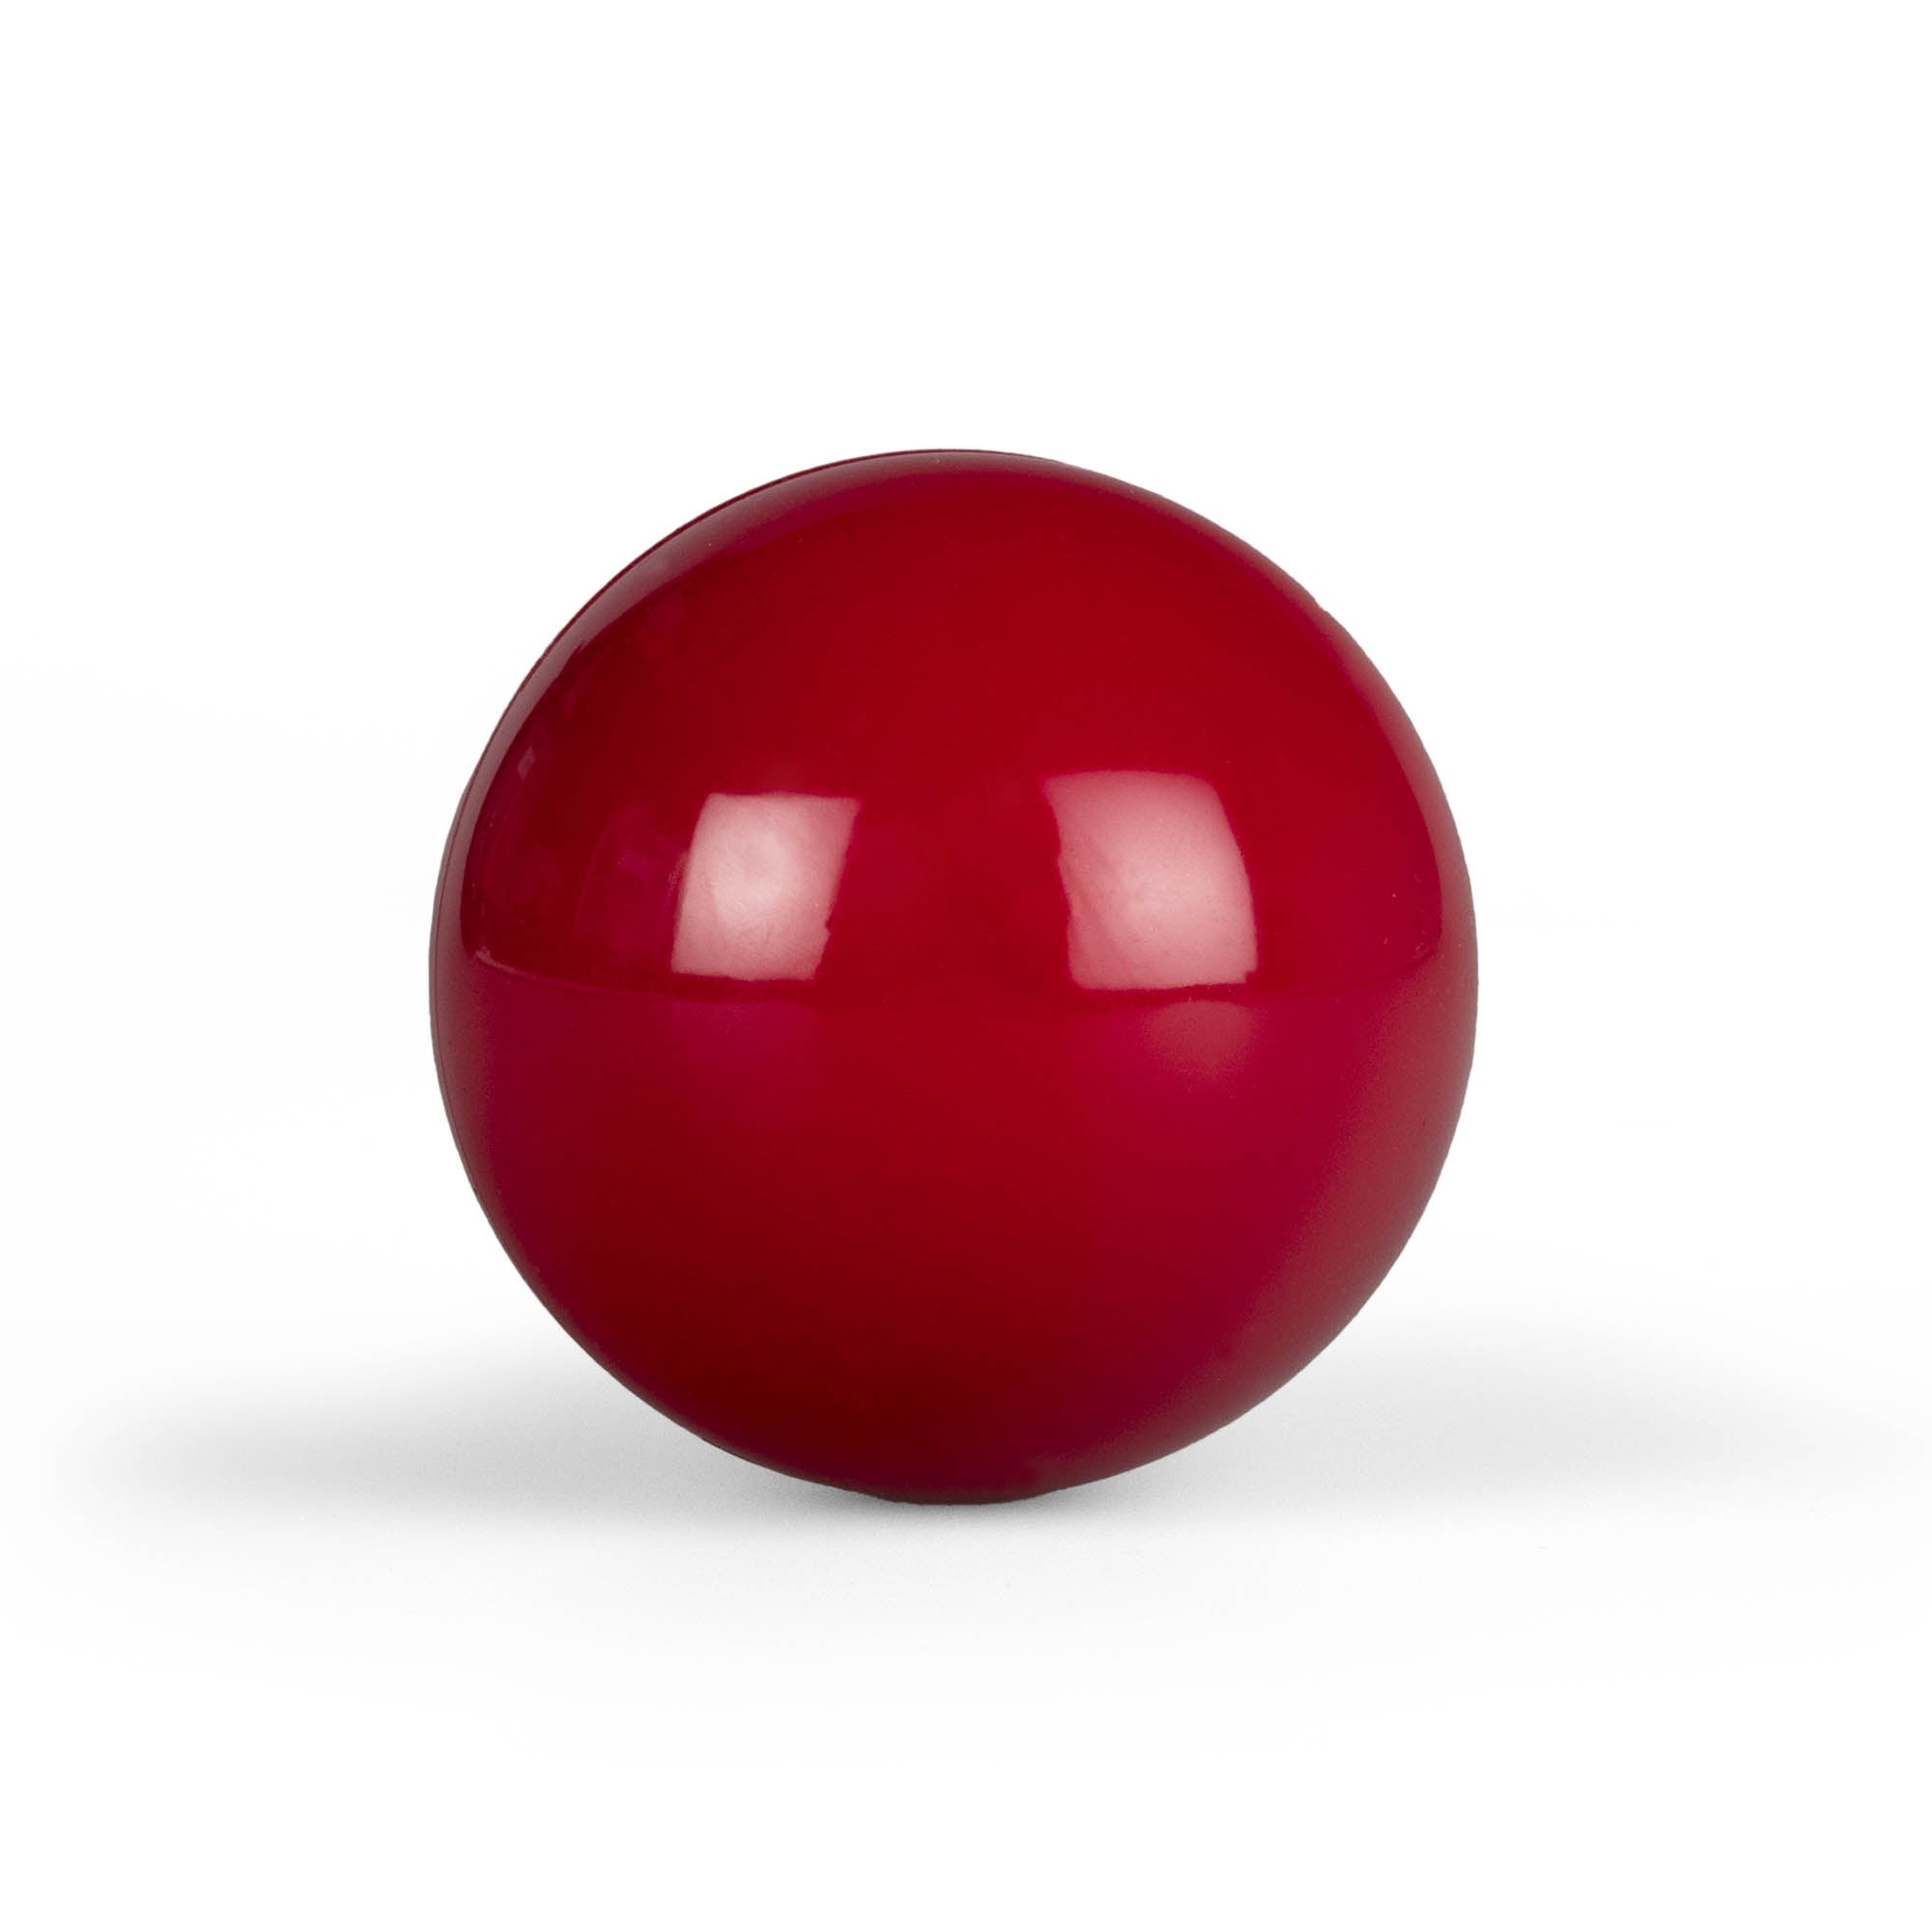 Mr babache 100mm stage ball red straight on white background